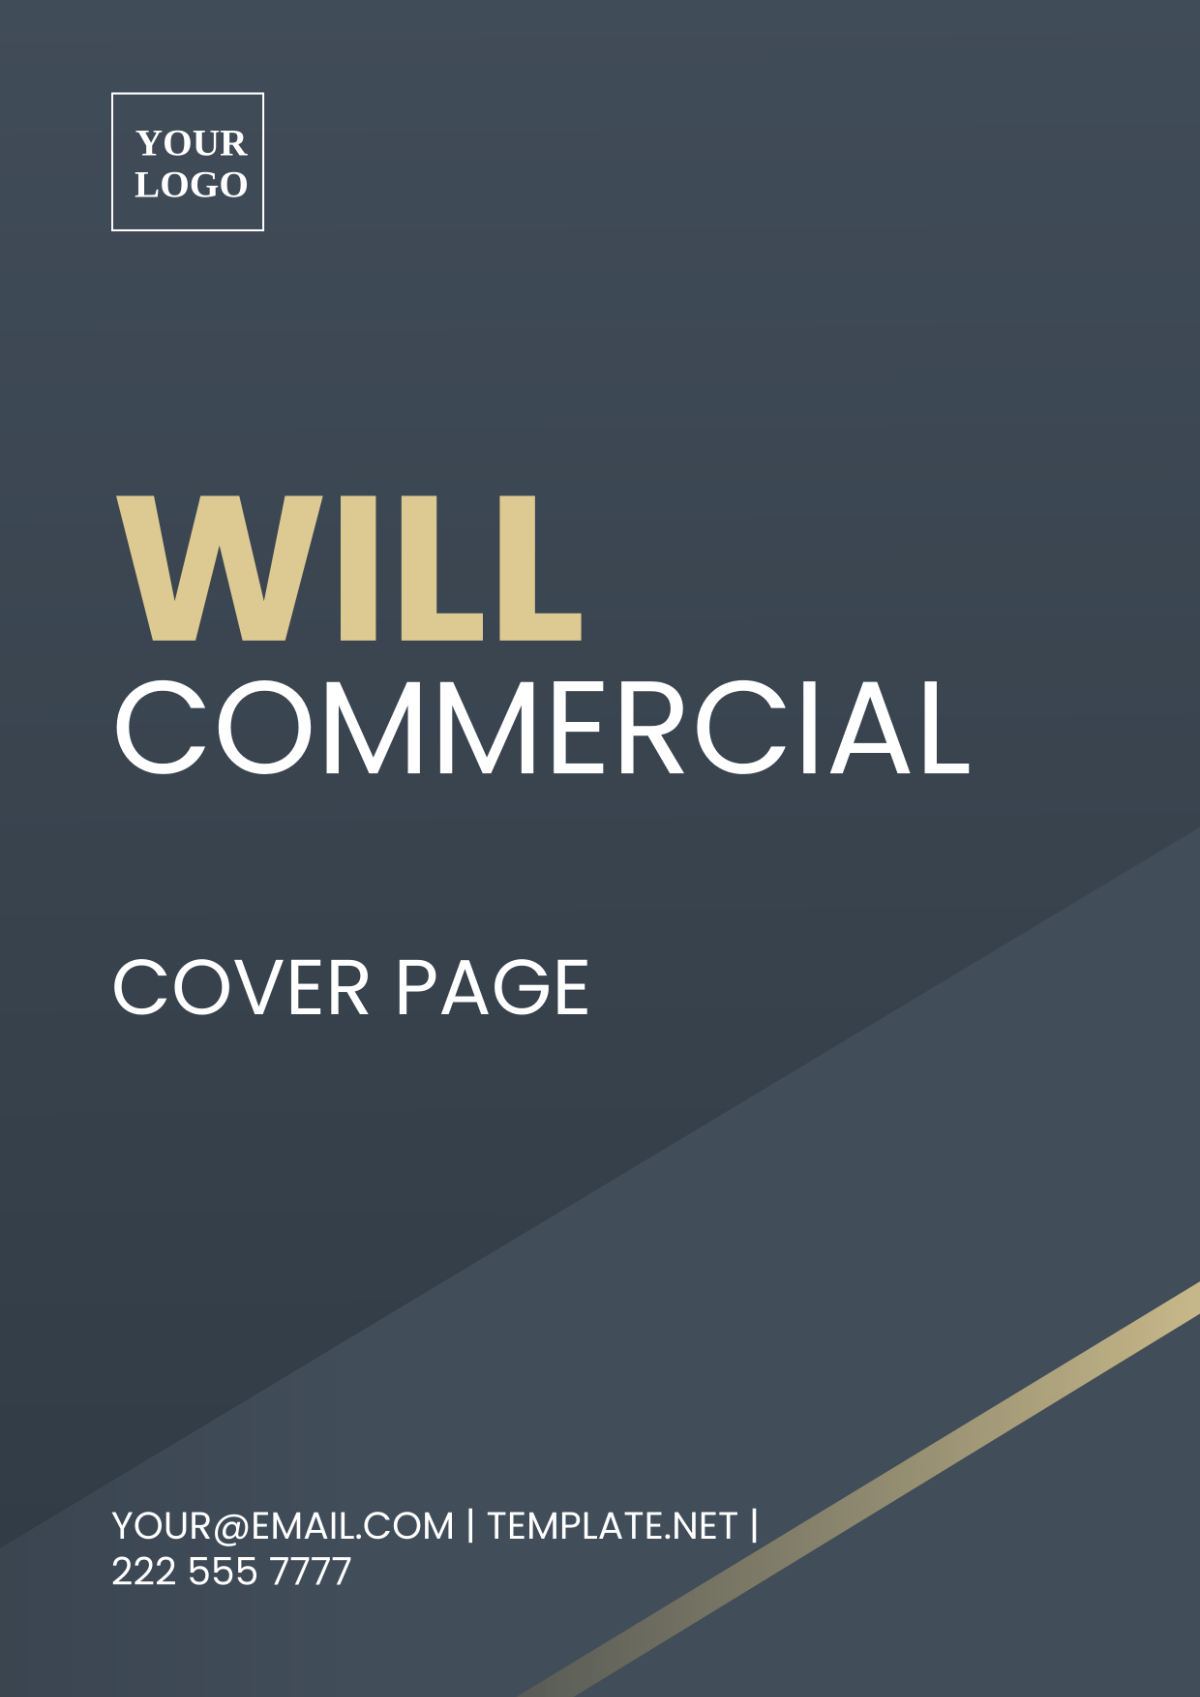 Will Commercial Cover Page